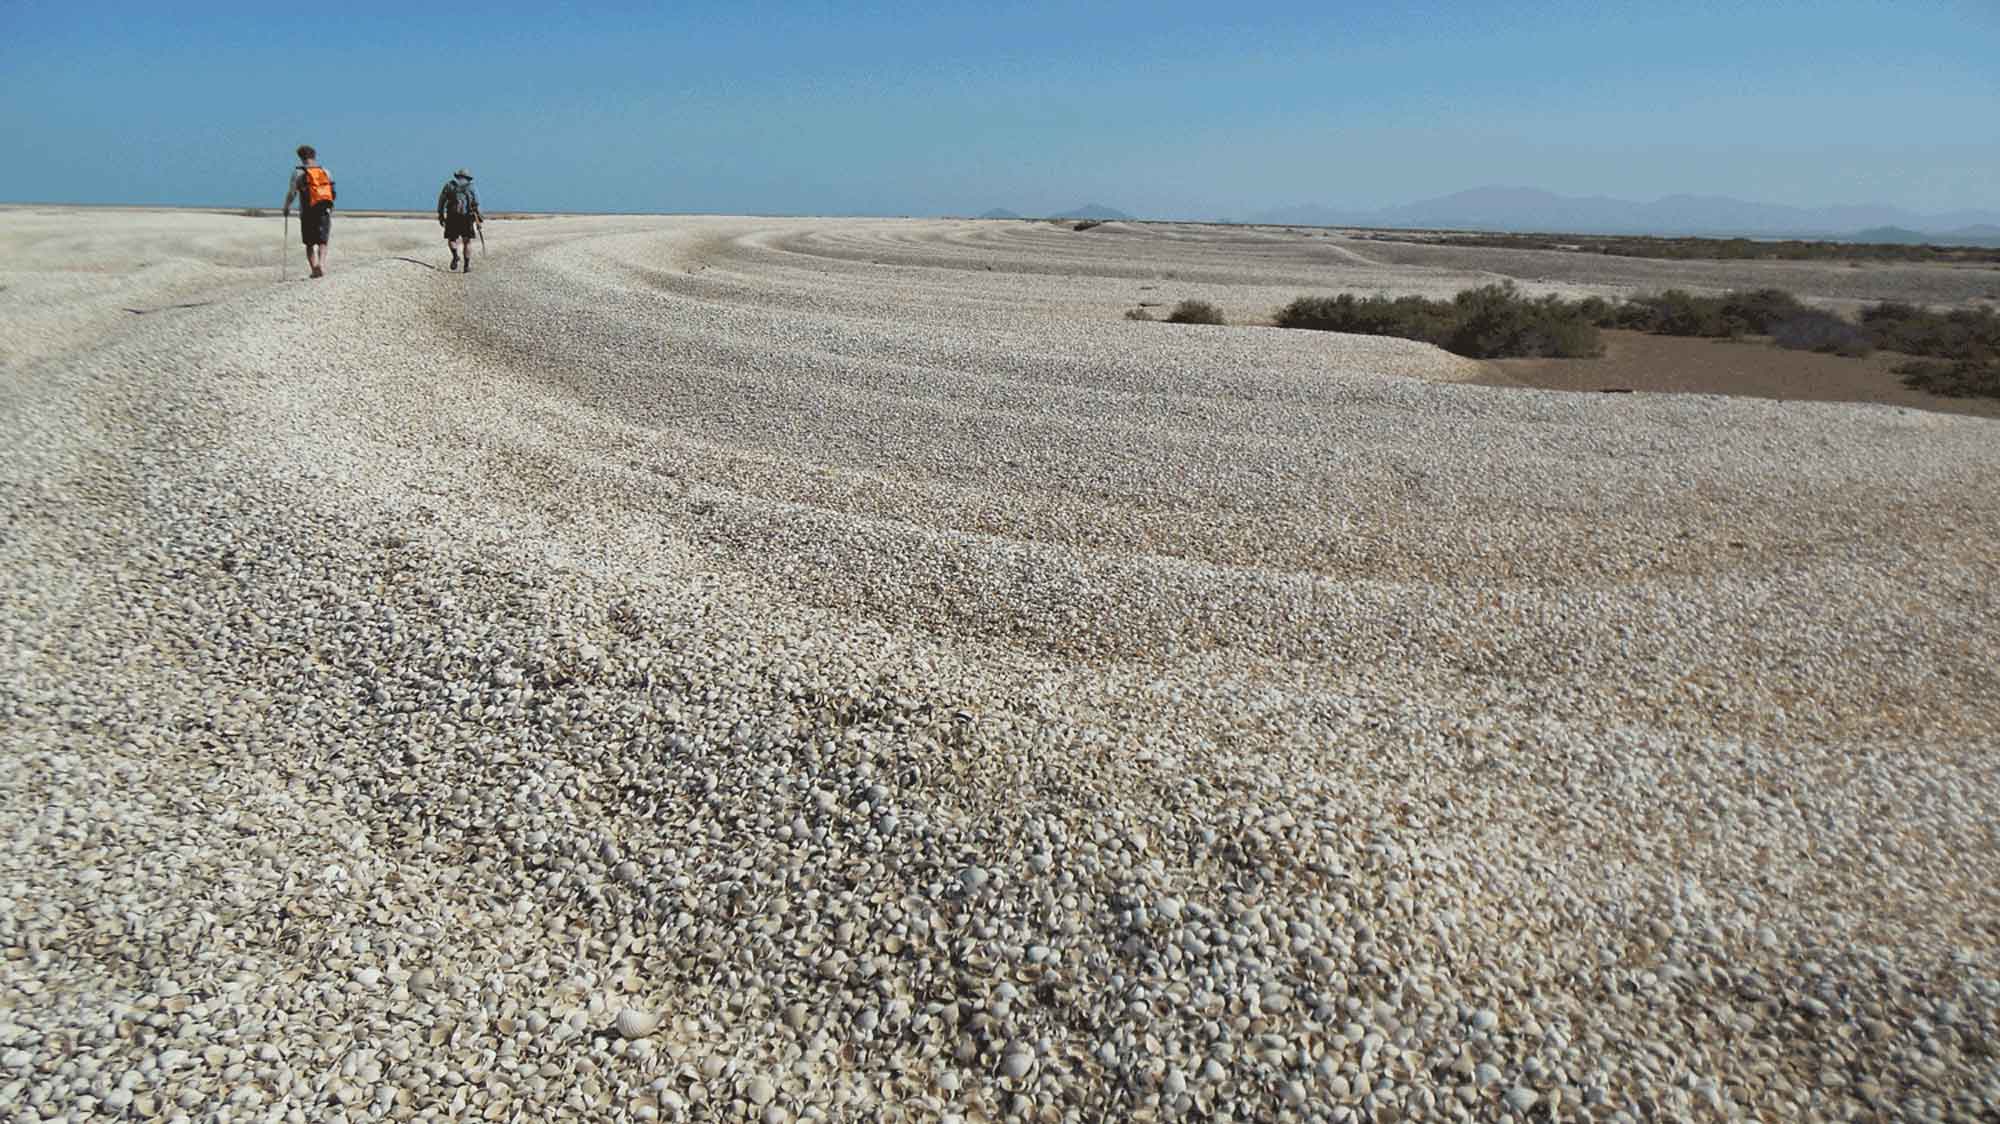 Photograph of two people walking on a landscape covered with clam shells.